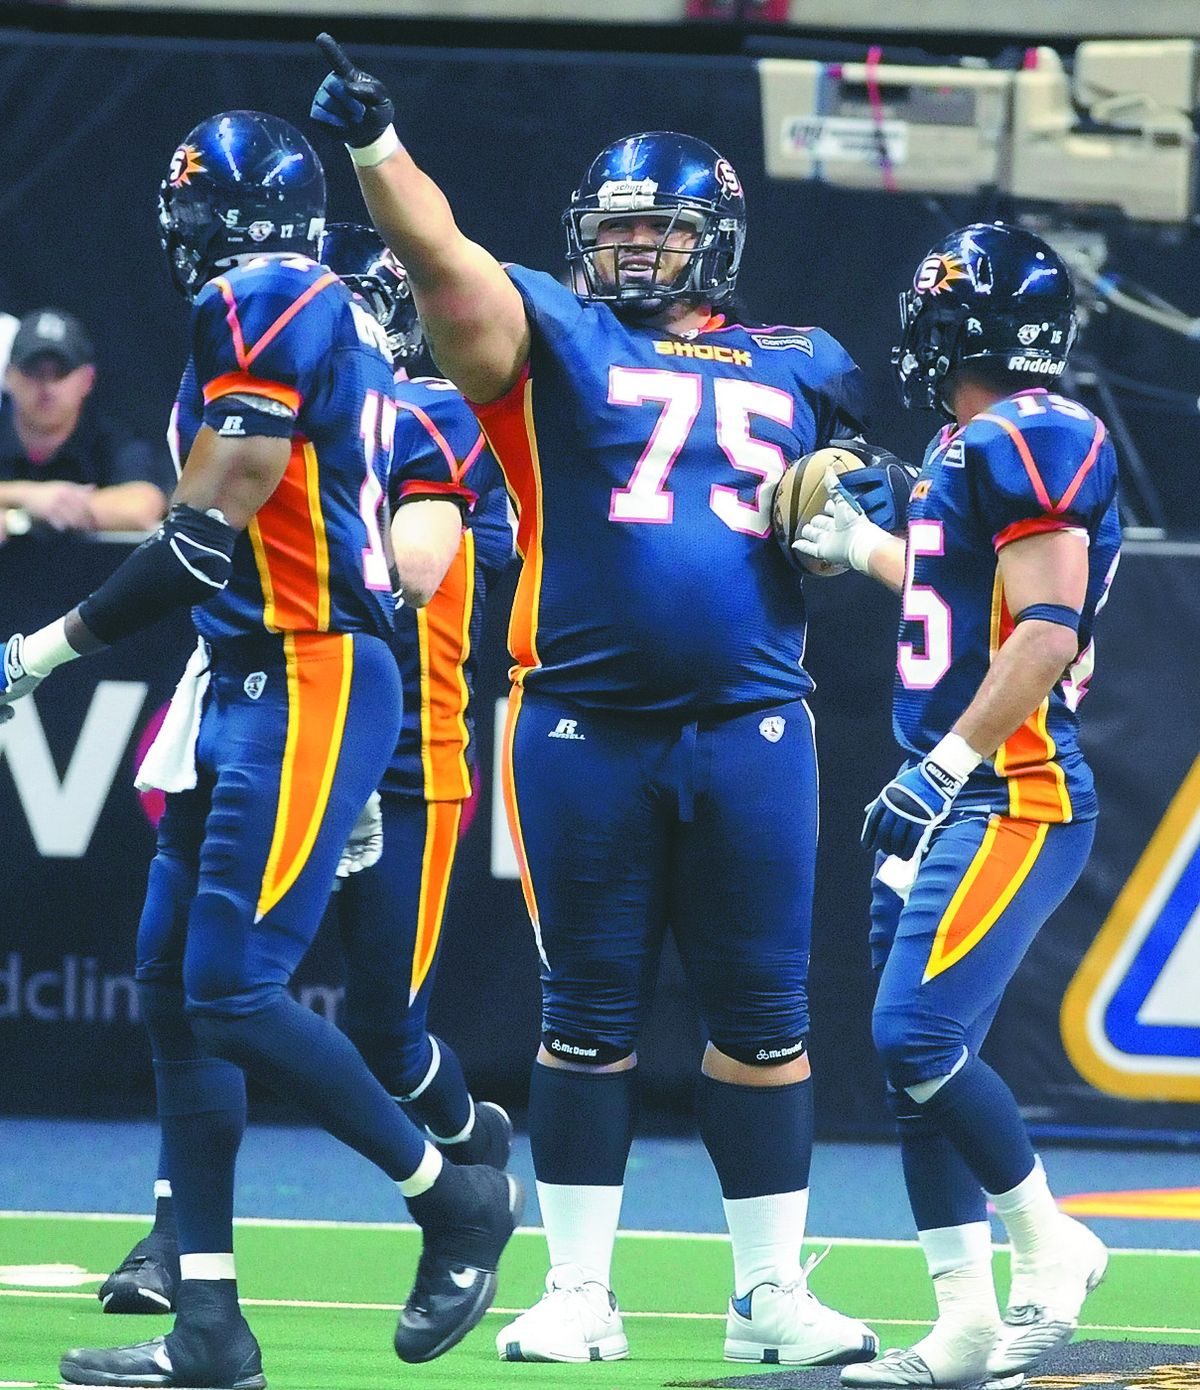 Ed Ta’amu celebrates his touchdown during the first half of Friday’s Shock game at the Arena. (Christopher Anderson)